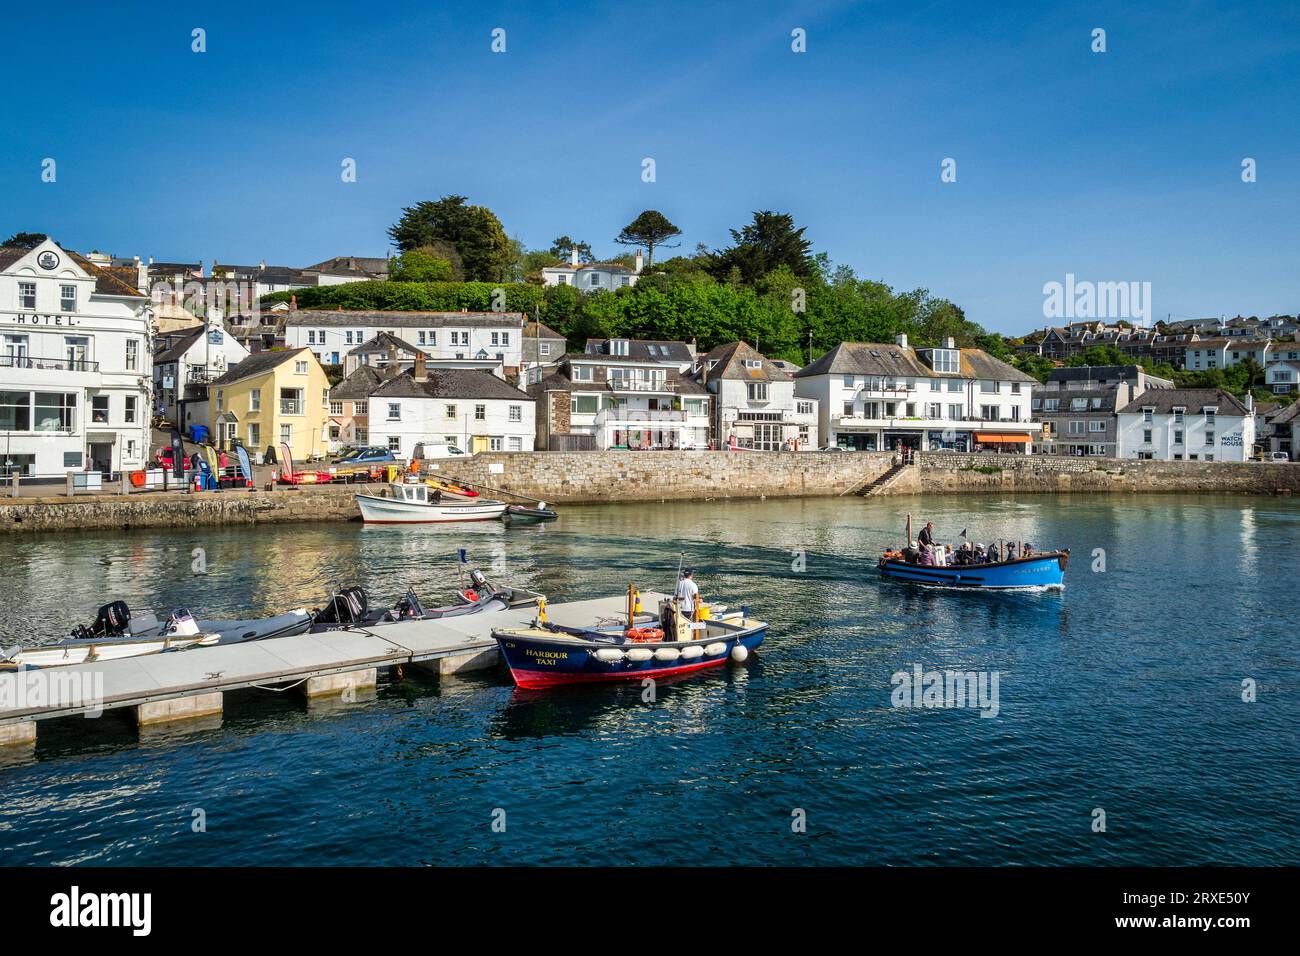 24 May 2023: St Mawes, Cornwall, UK - The harbour of St Mawes on the Roseland Peninsula, with the Place ferry departing. Stock Photo